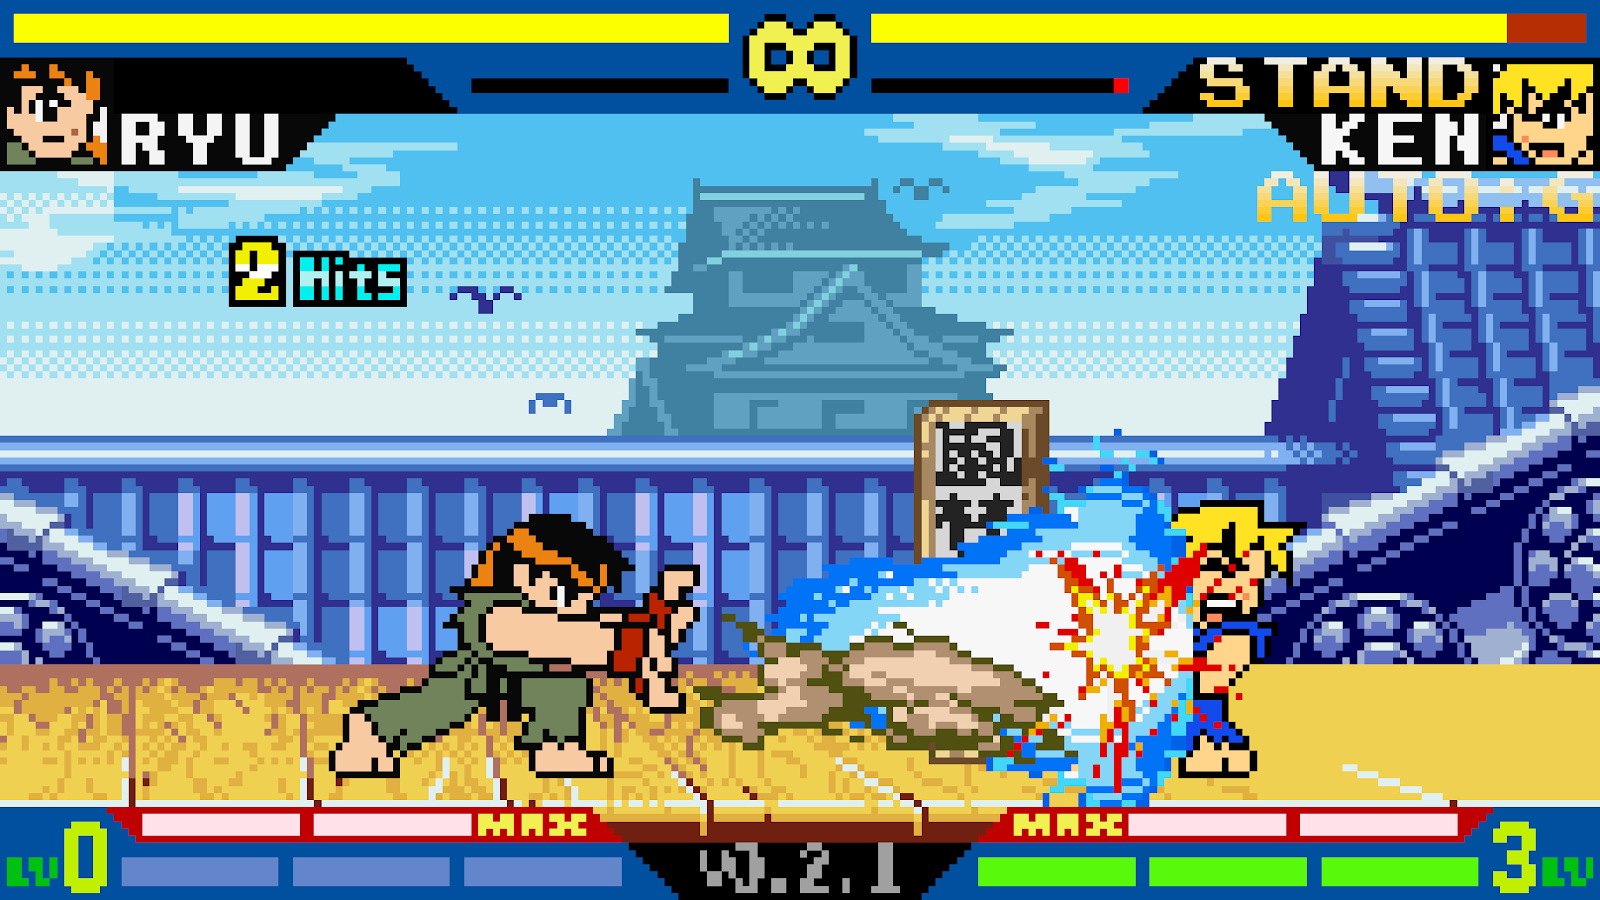 Indie Retro News: Pocket Fighter EX - Love Street Fighter? Try this free  fan based game!